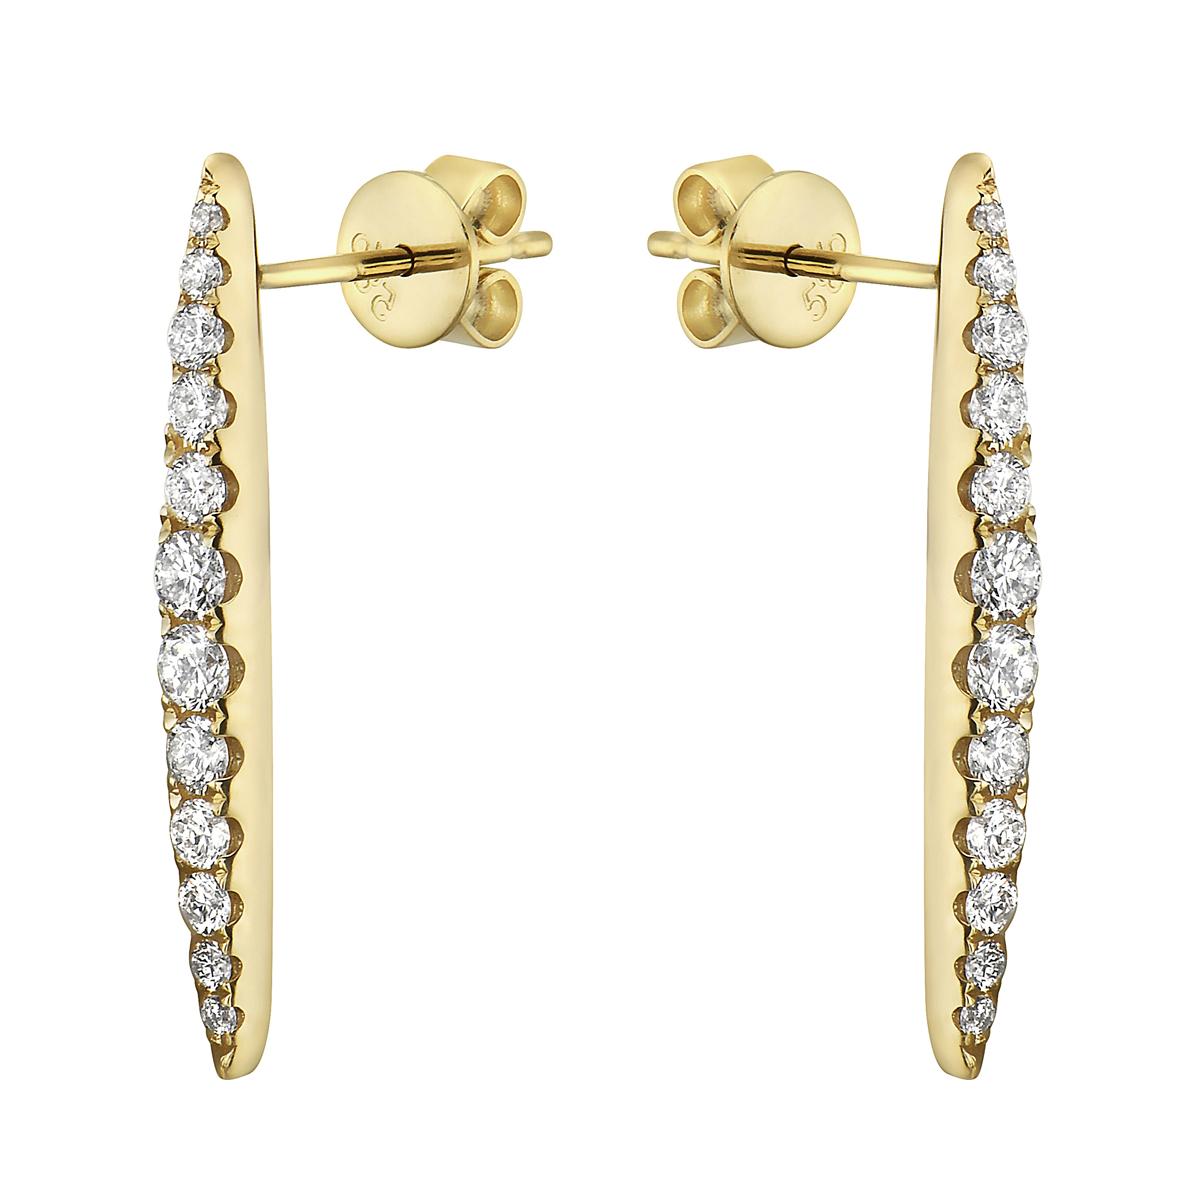 With these exquisite yellow gold drop diamond earrings, style and glamour are in the spotlight. These 14 karat yellow gold earrings are made from 2.9 grams of gold and is covered in 24 round SI1-SI2, GH color diamonds totaling 0.52ct.